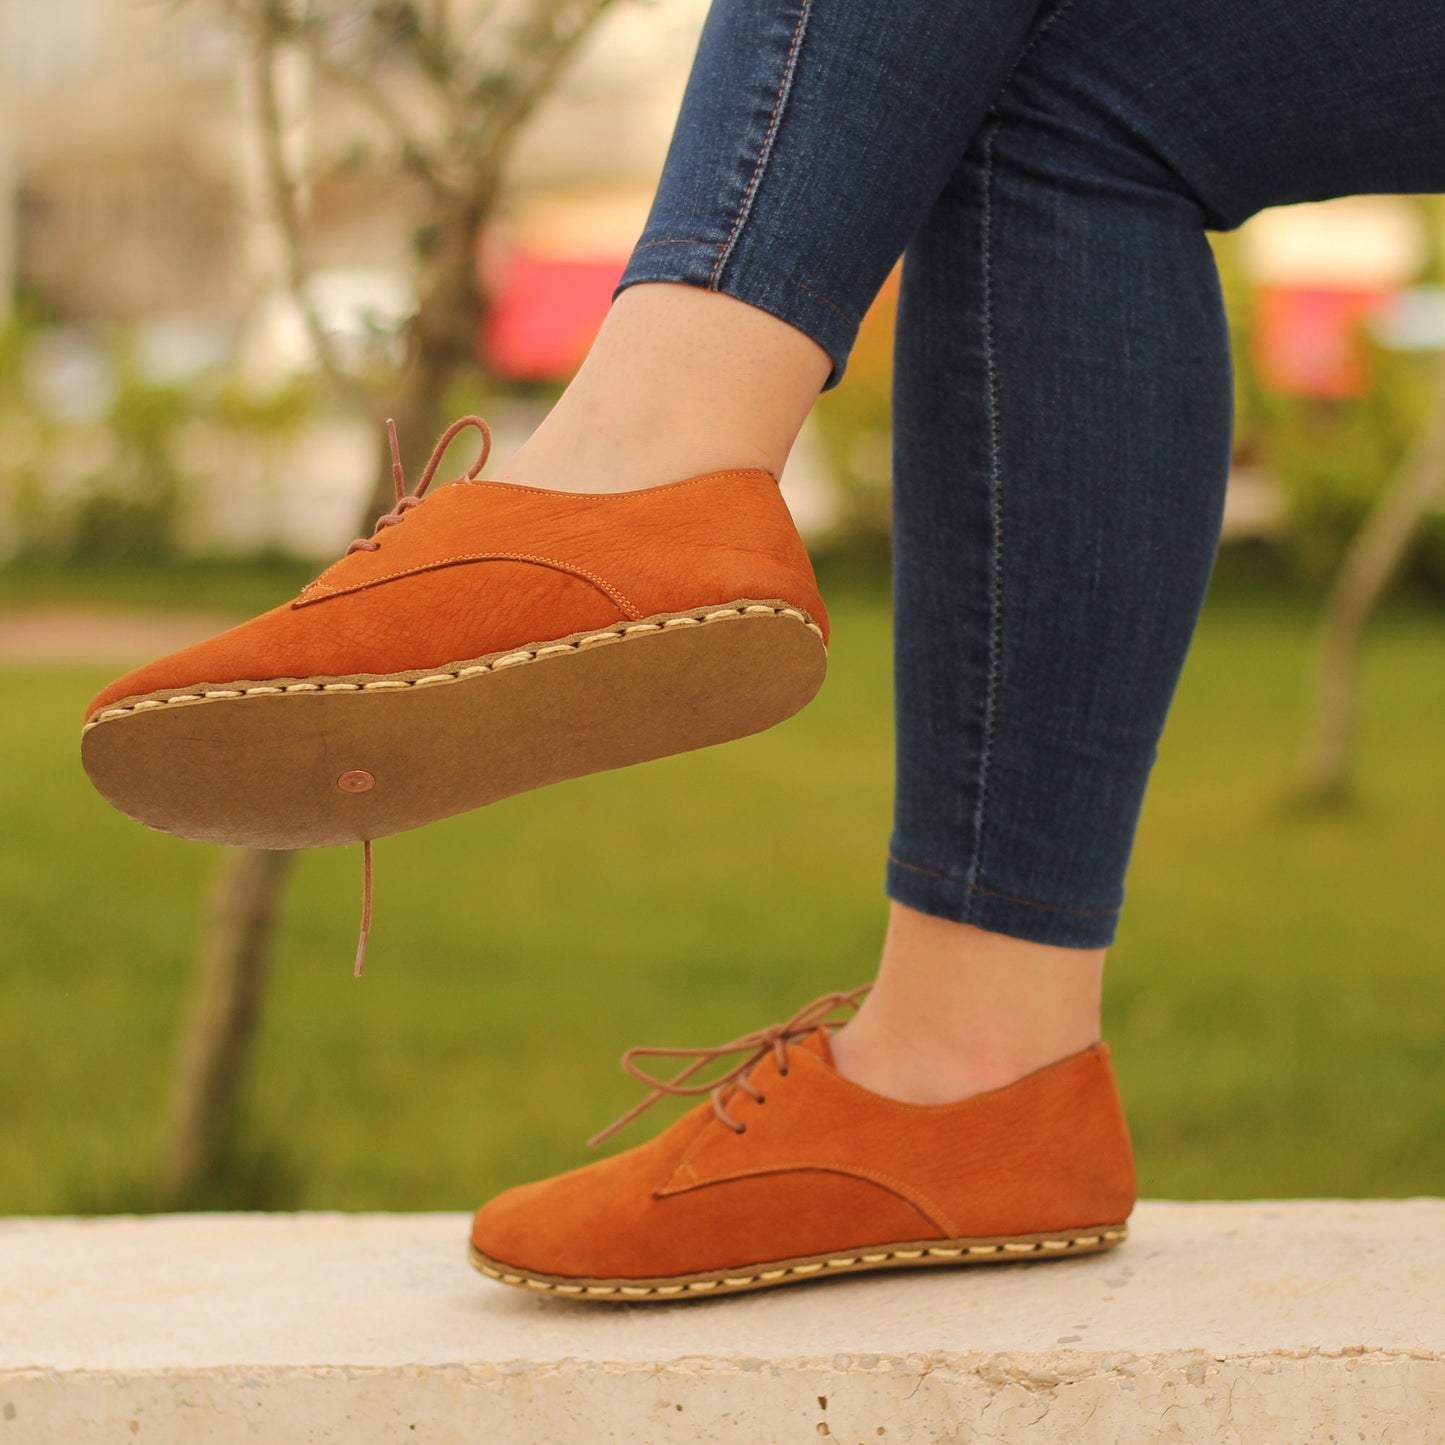 Step into Style with Handcrafted Women's Orange Nubuck Leather Shoes - Experience the Perfect Combination of Fashion and Quality!